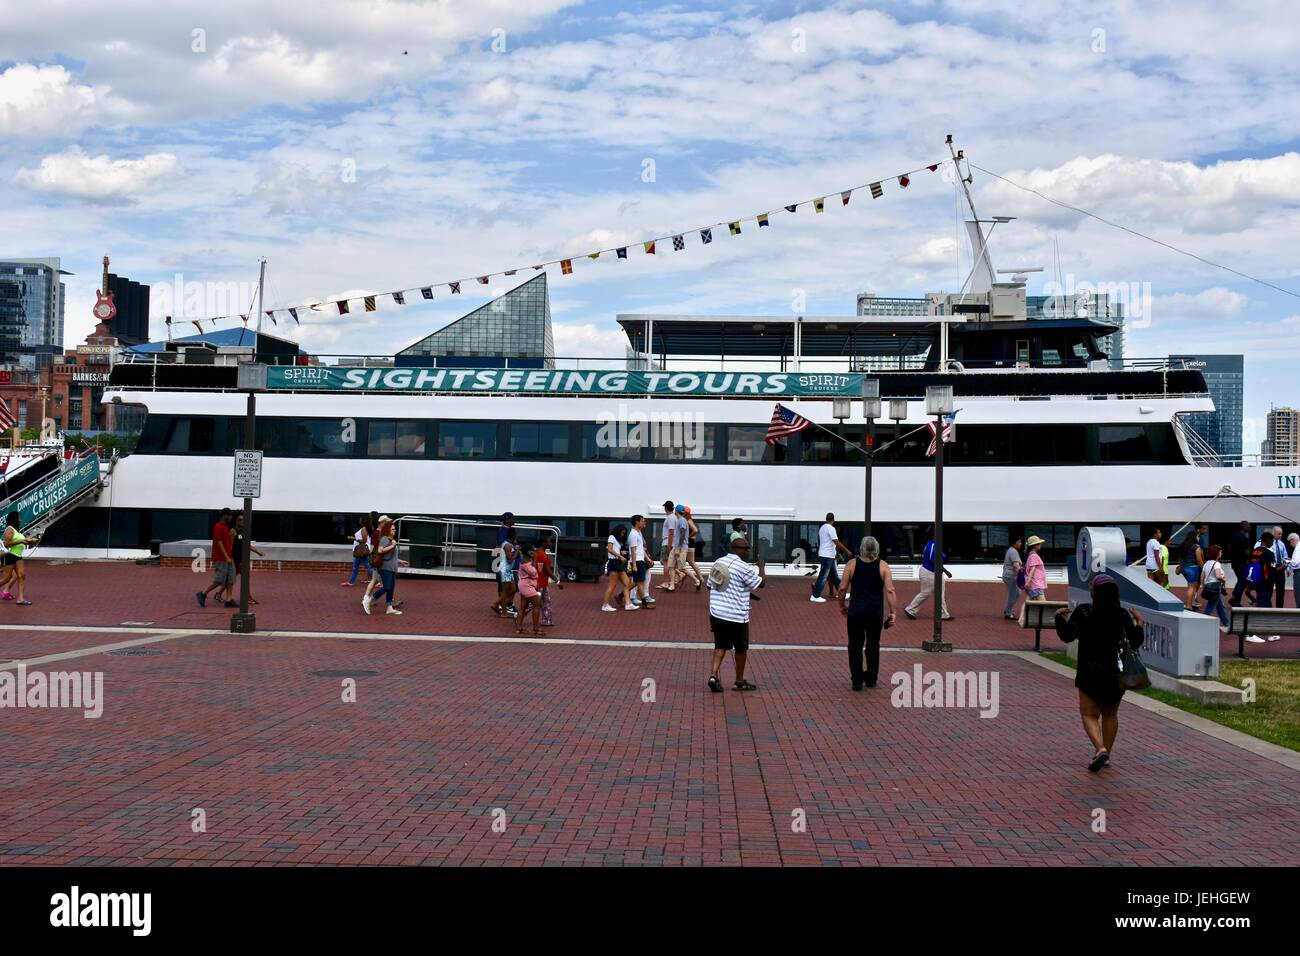 Baltimore inner harbor sight seeing tours boat Stock Photo